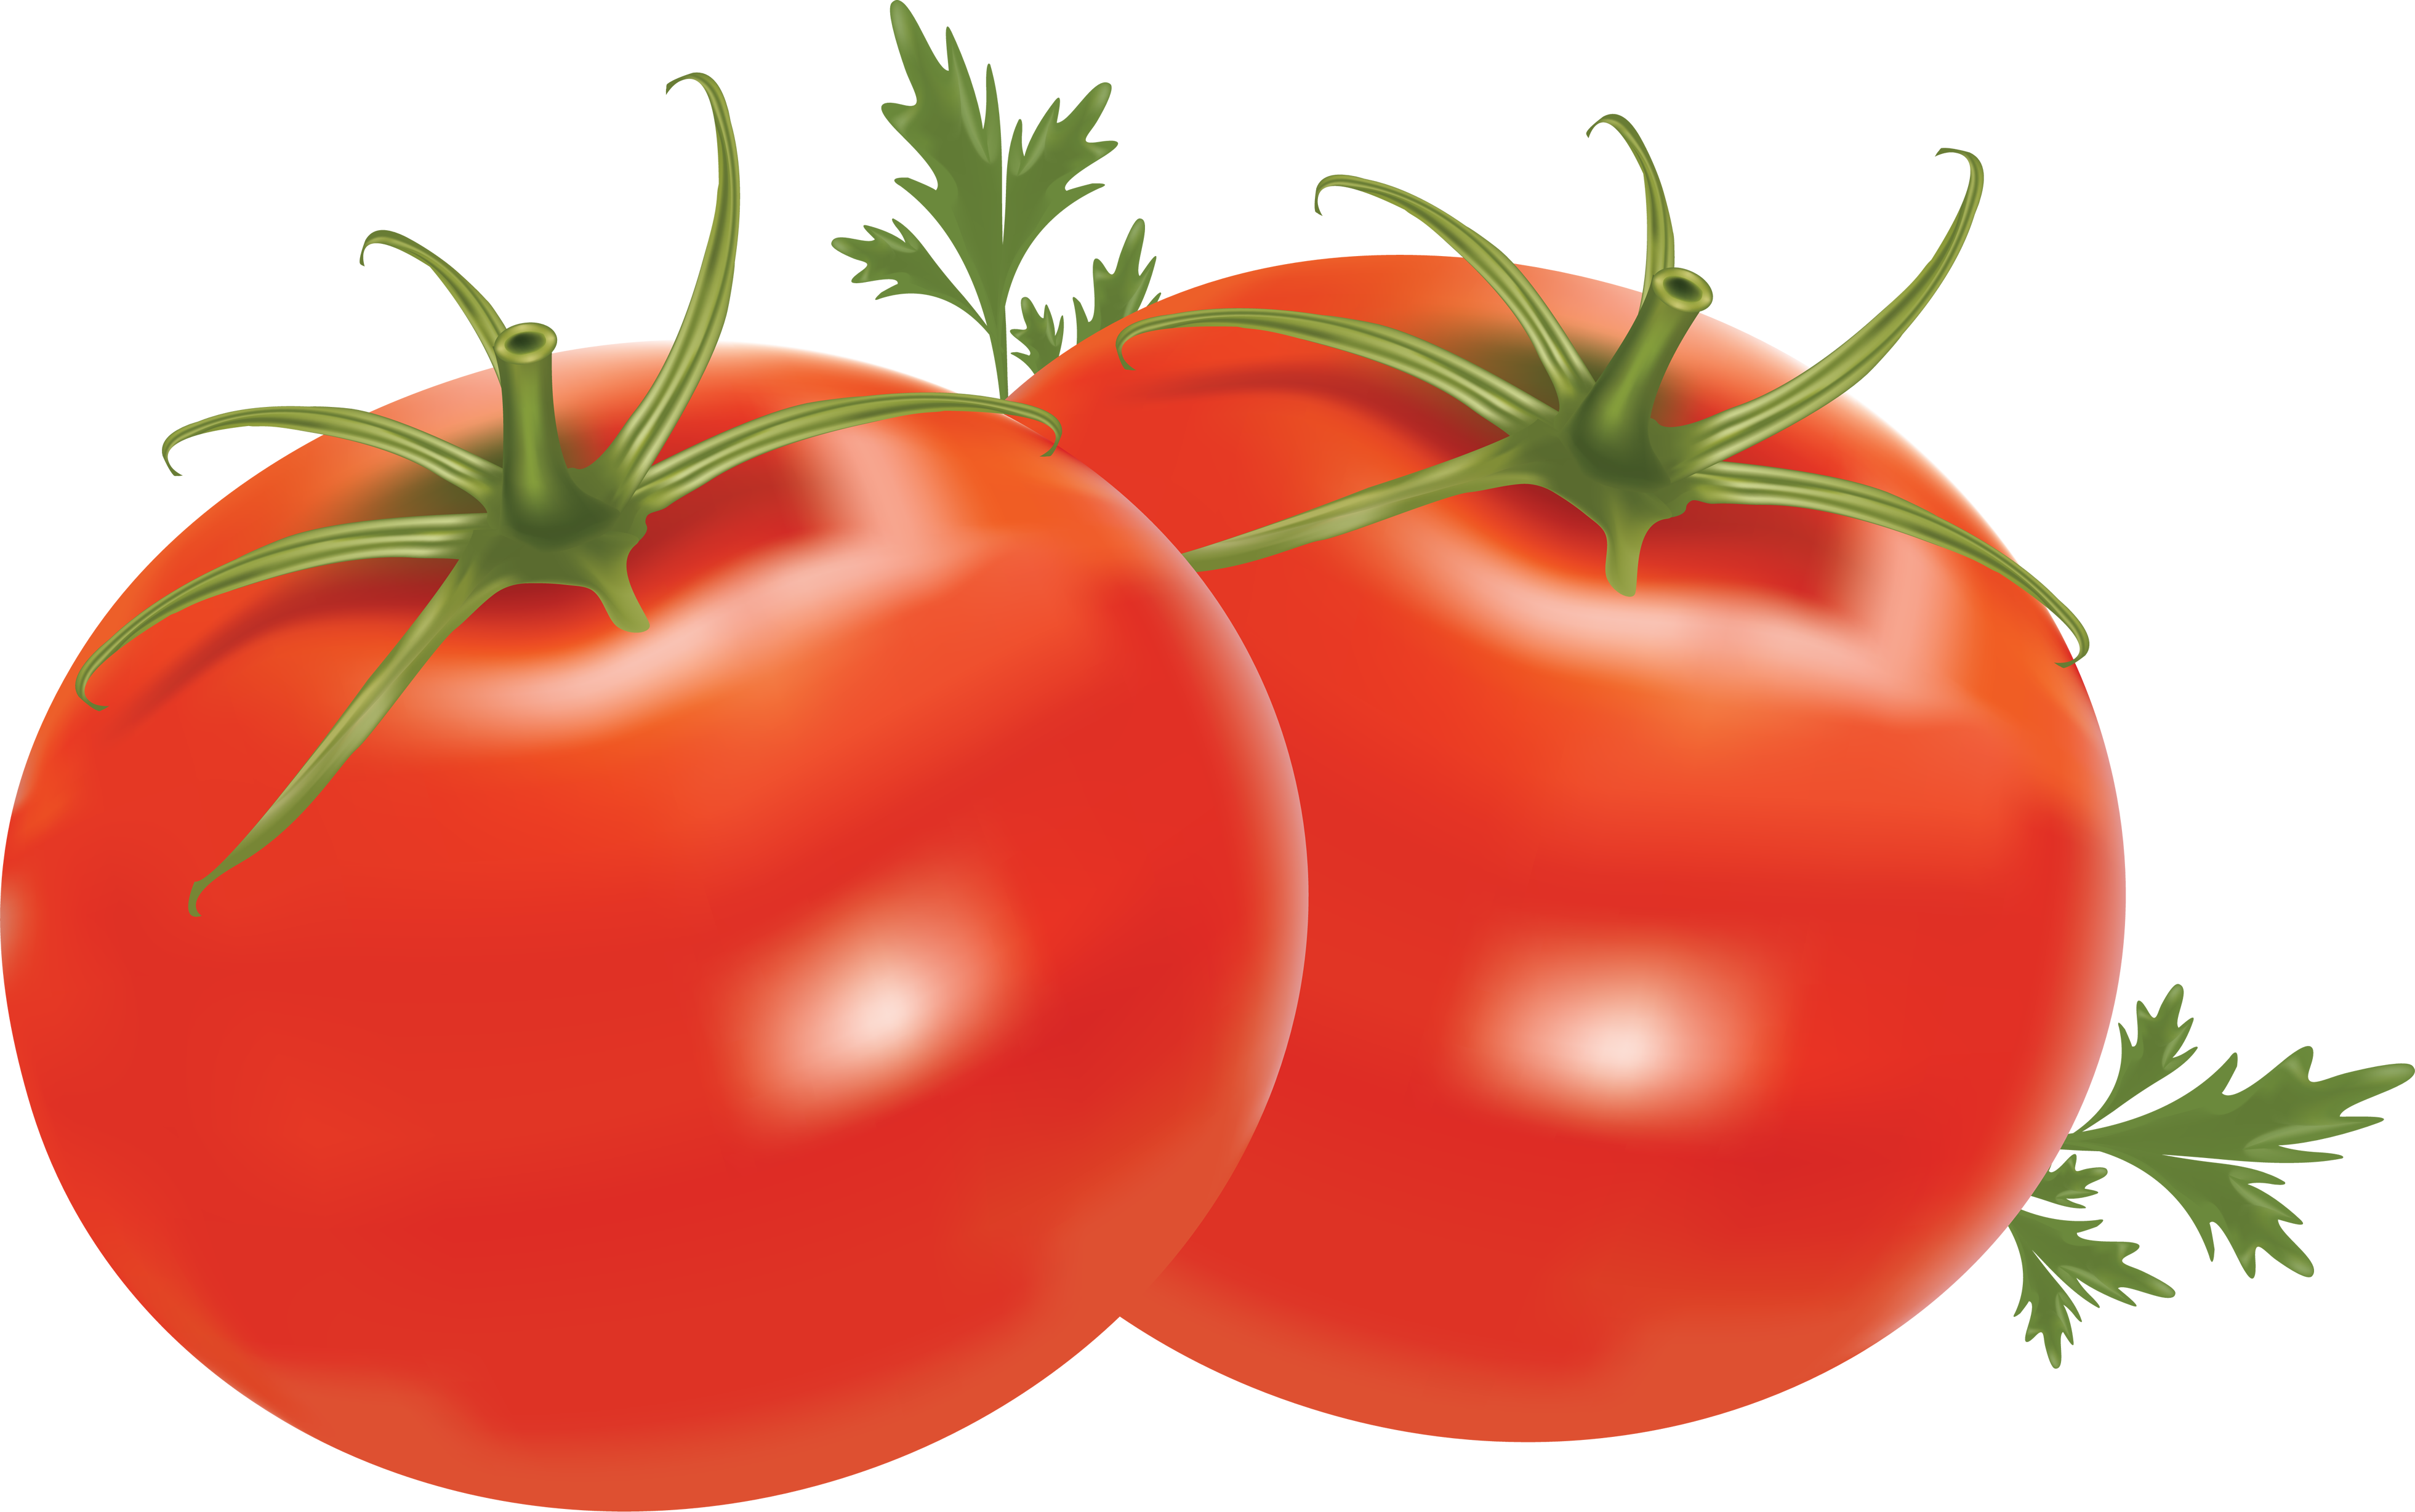 Two Juicy Tomato PNG image